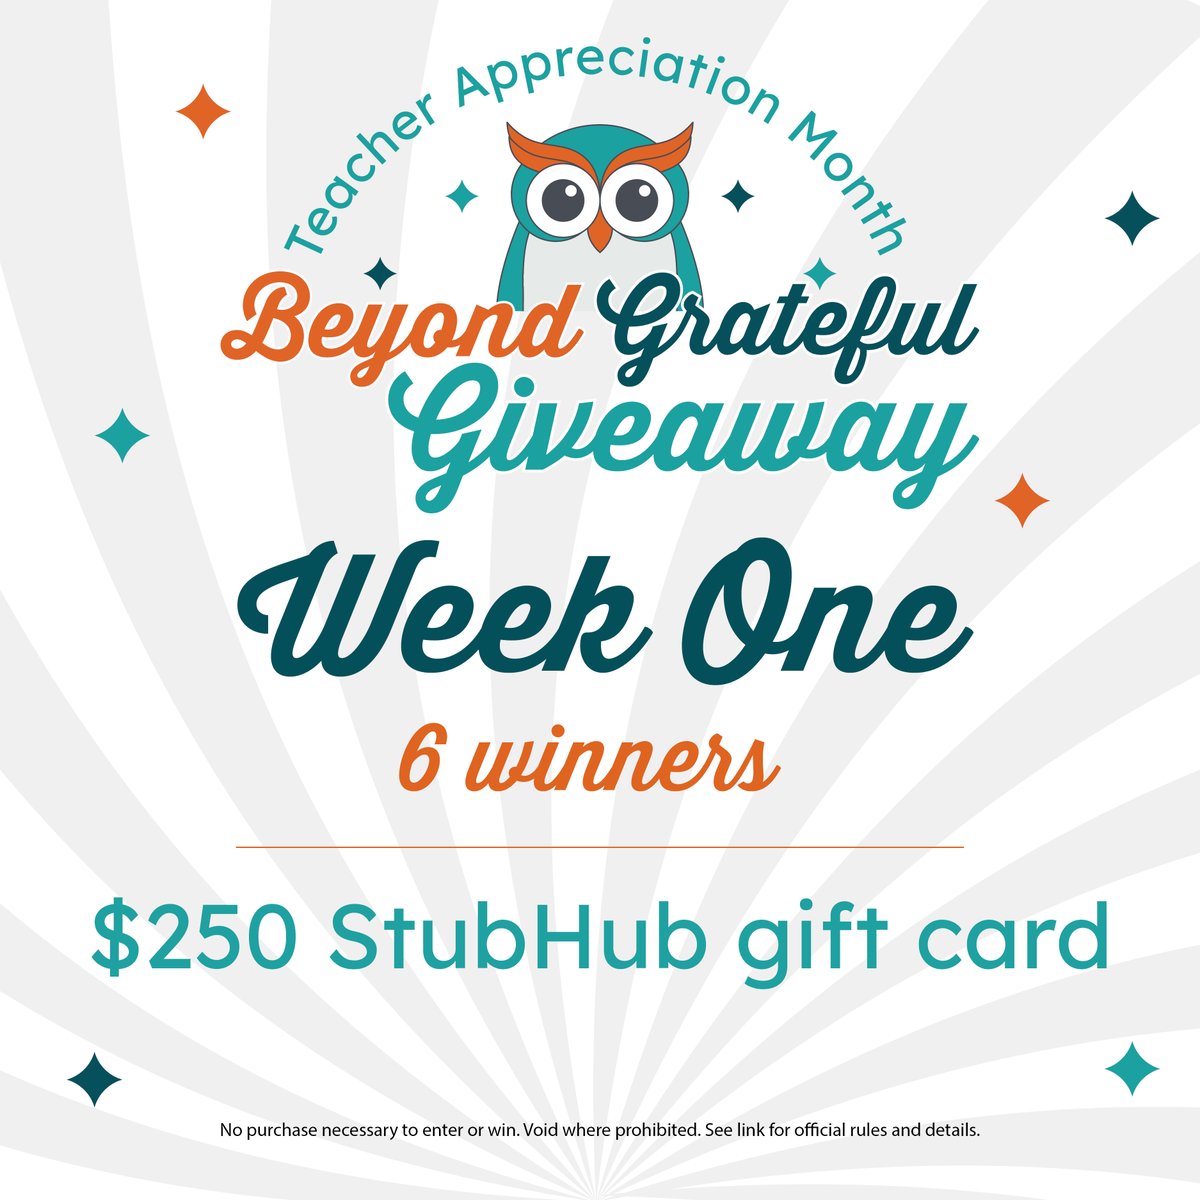 It’s week one of our FOUR-WEEK giveaway! This week, six lucky winners will each receive a $250 StubHub gift card, and we’re announcing winners this Friday! Enter for your chance to win and see what else we have planned for this month: ow.ly/Xmpy50RmxlN #HMBeyondGrateful